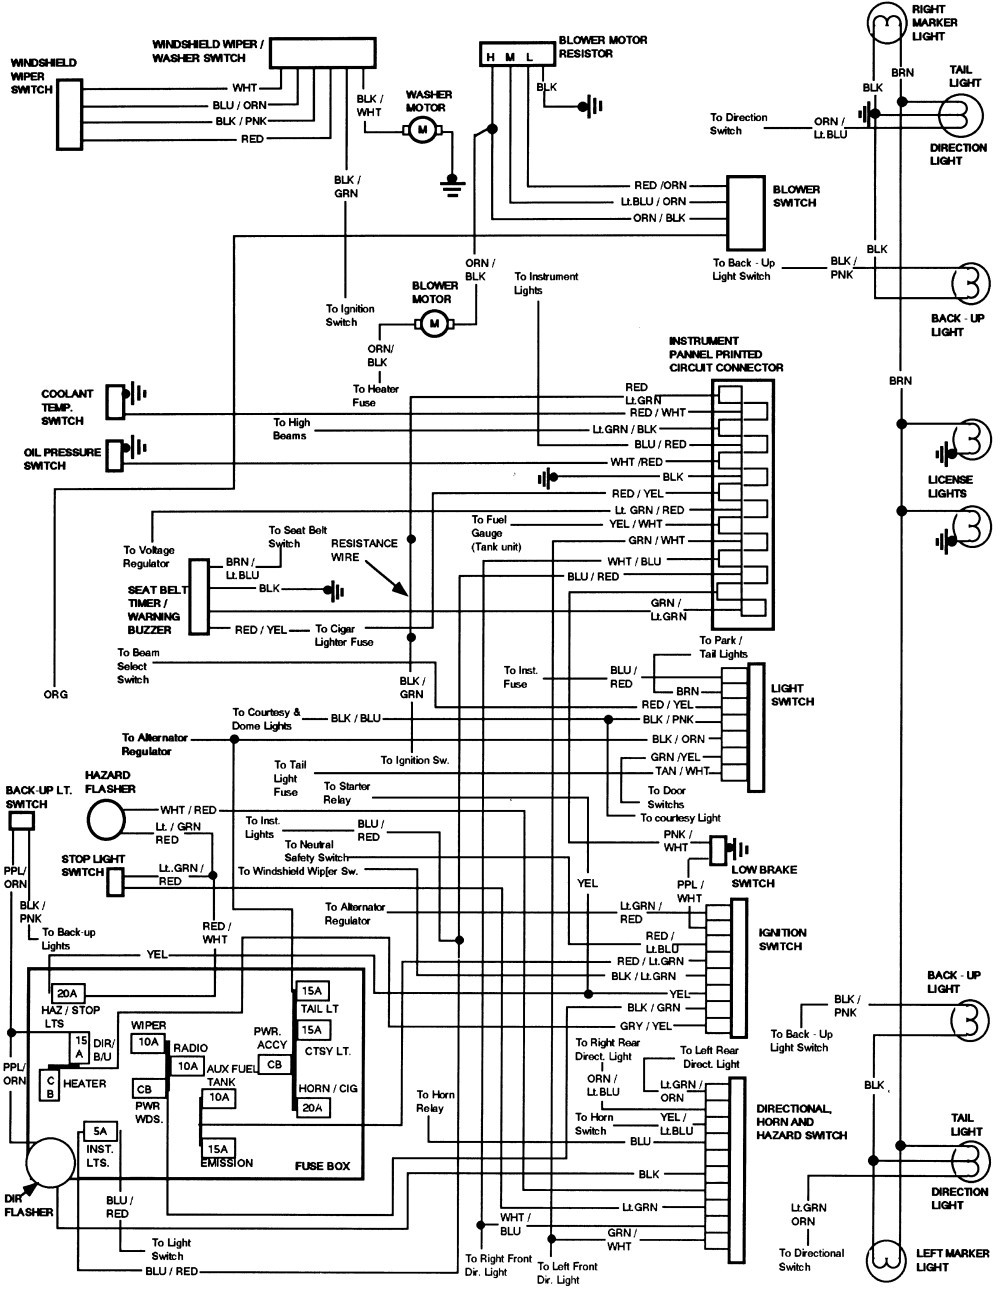 Wiring Diagram For 1985 Ford F150 Truck Enthusiasts Forums In F250